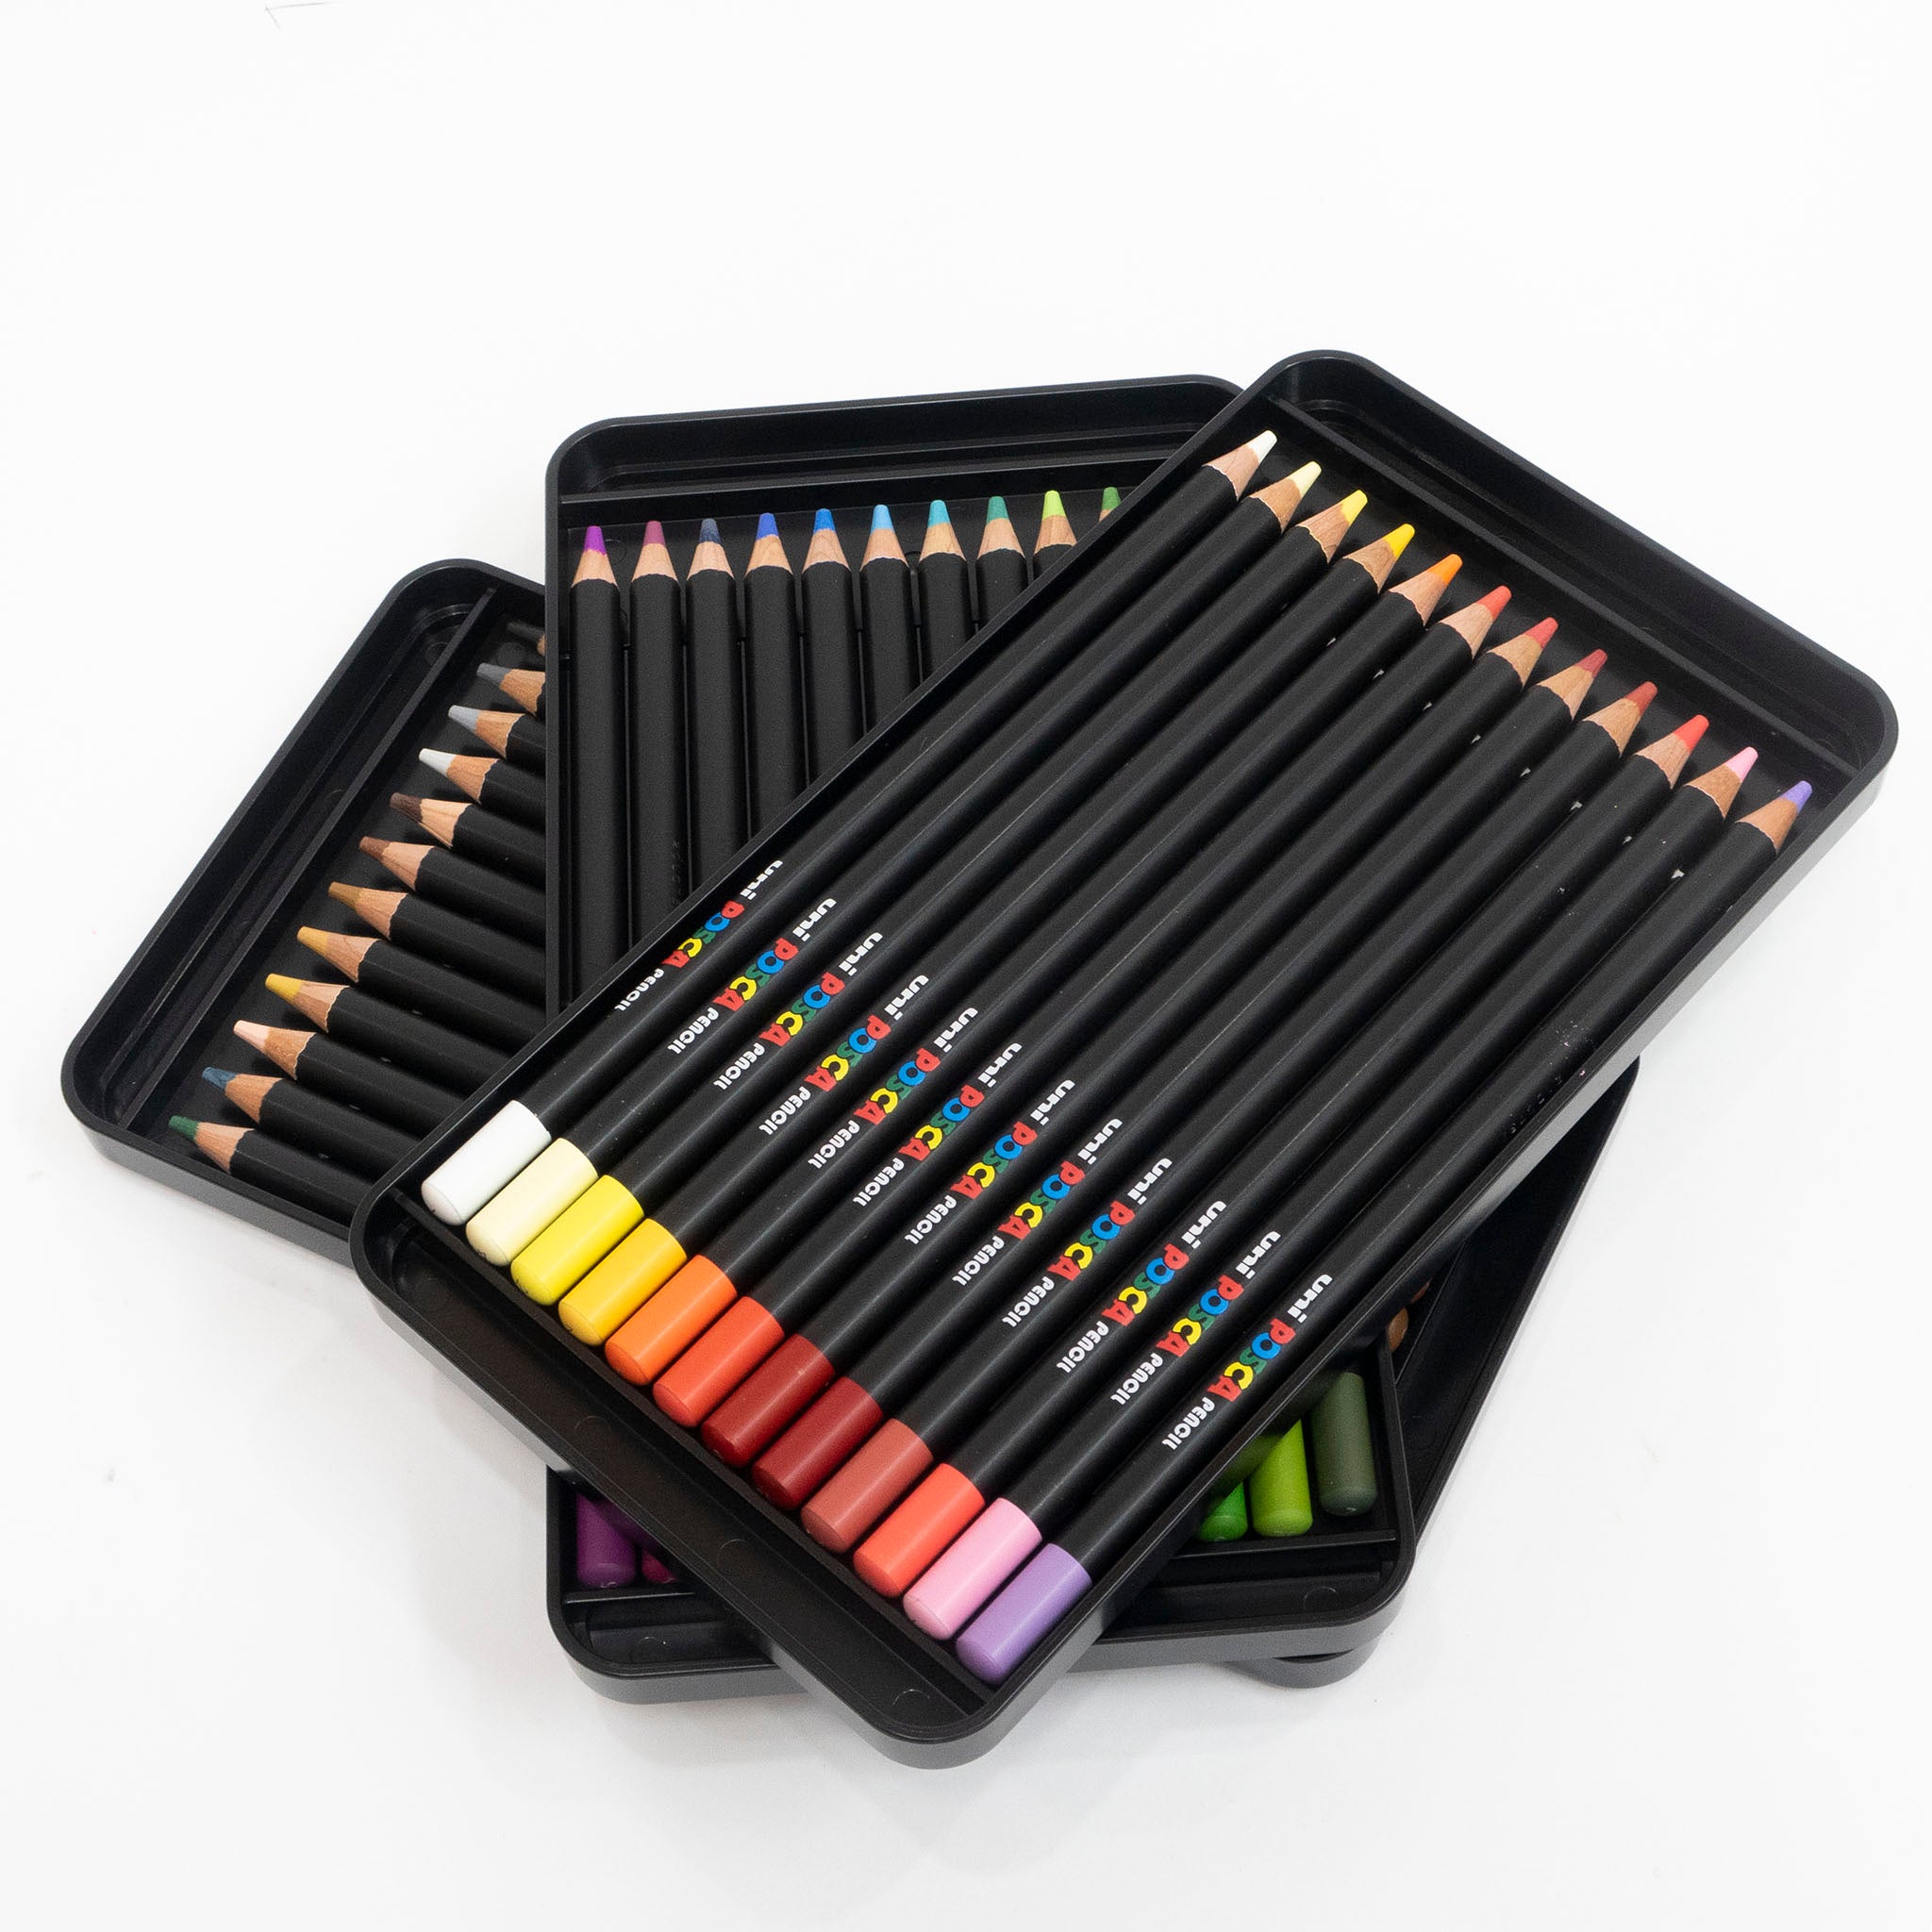 Posca Oil-Based Colored Pencil Set of 36